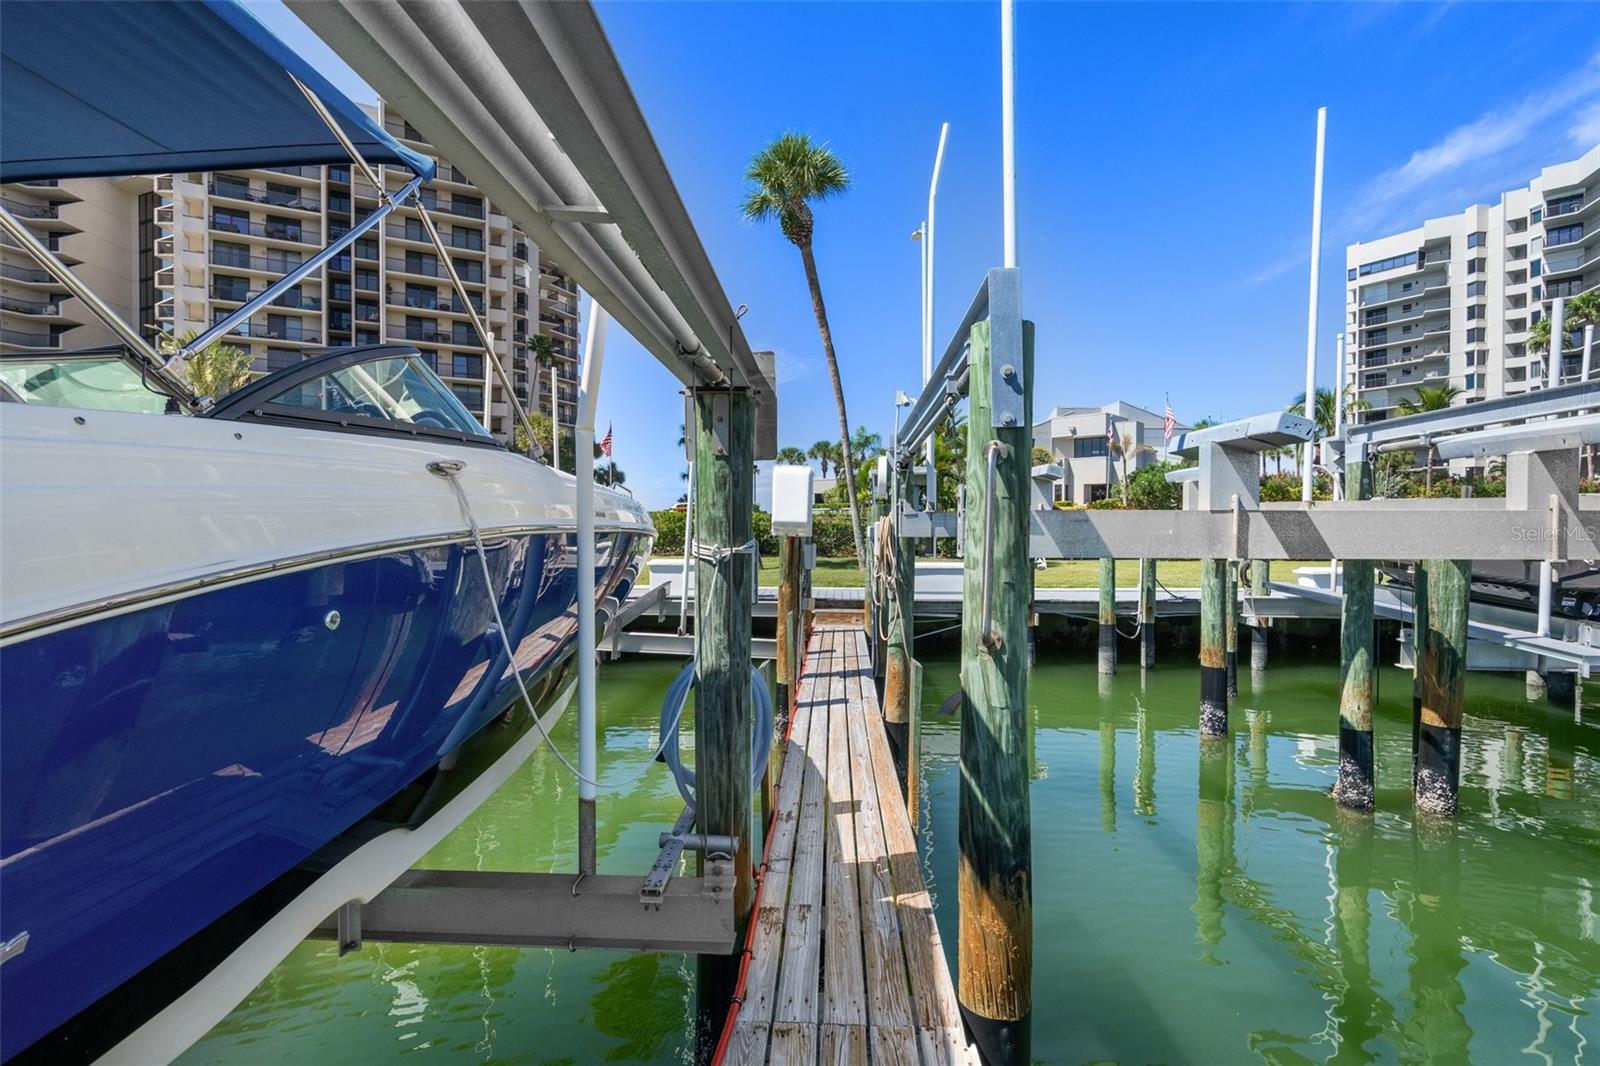 40' deeded boat slip.  Quick access to the open gulf and all the nearby islands and restaurants.